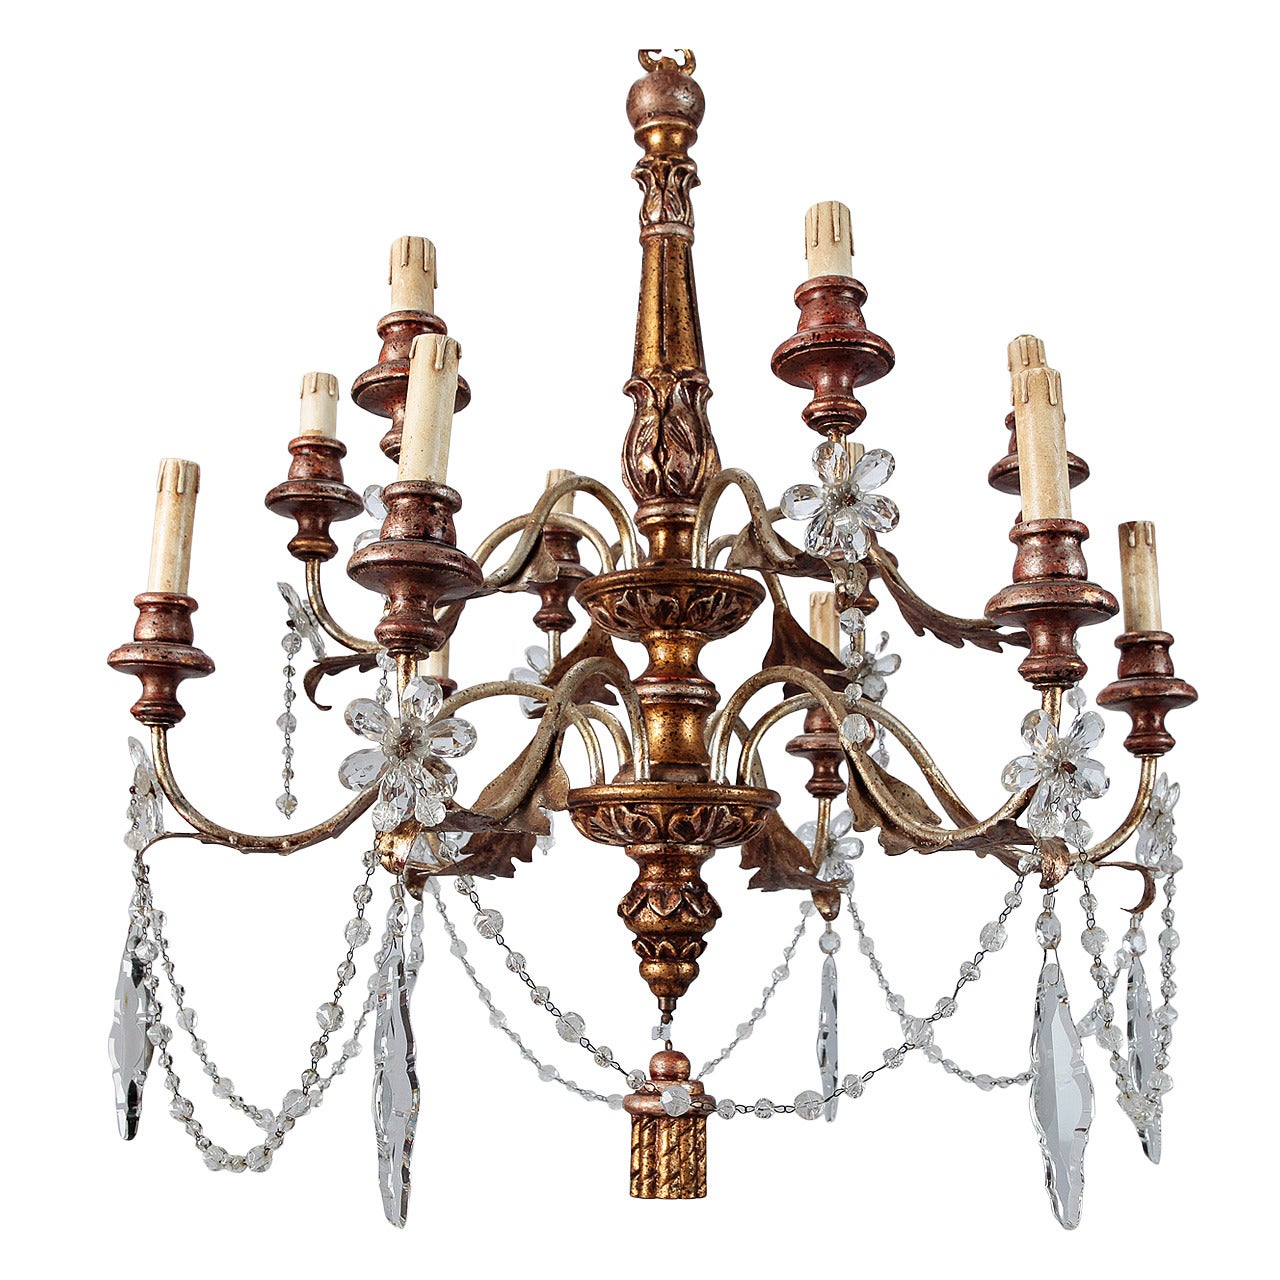 19th Century French Twelve-Light Gild Wood and Crystal Chandelier